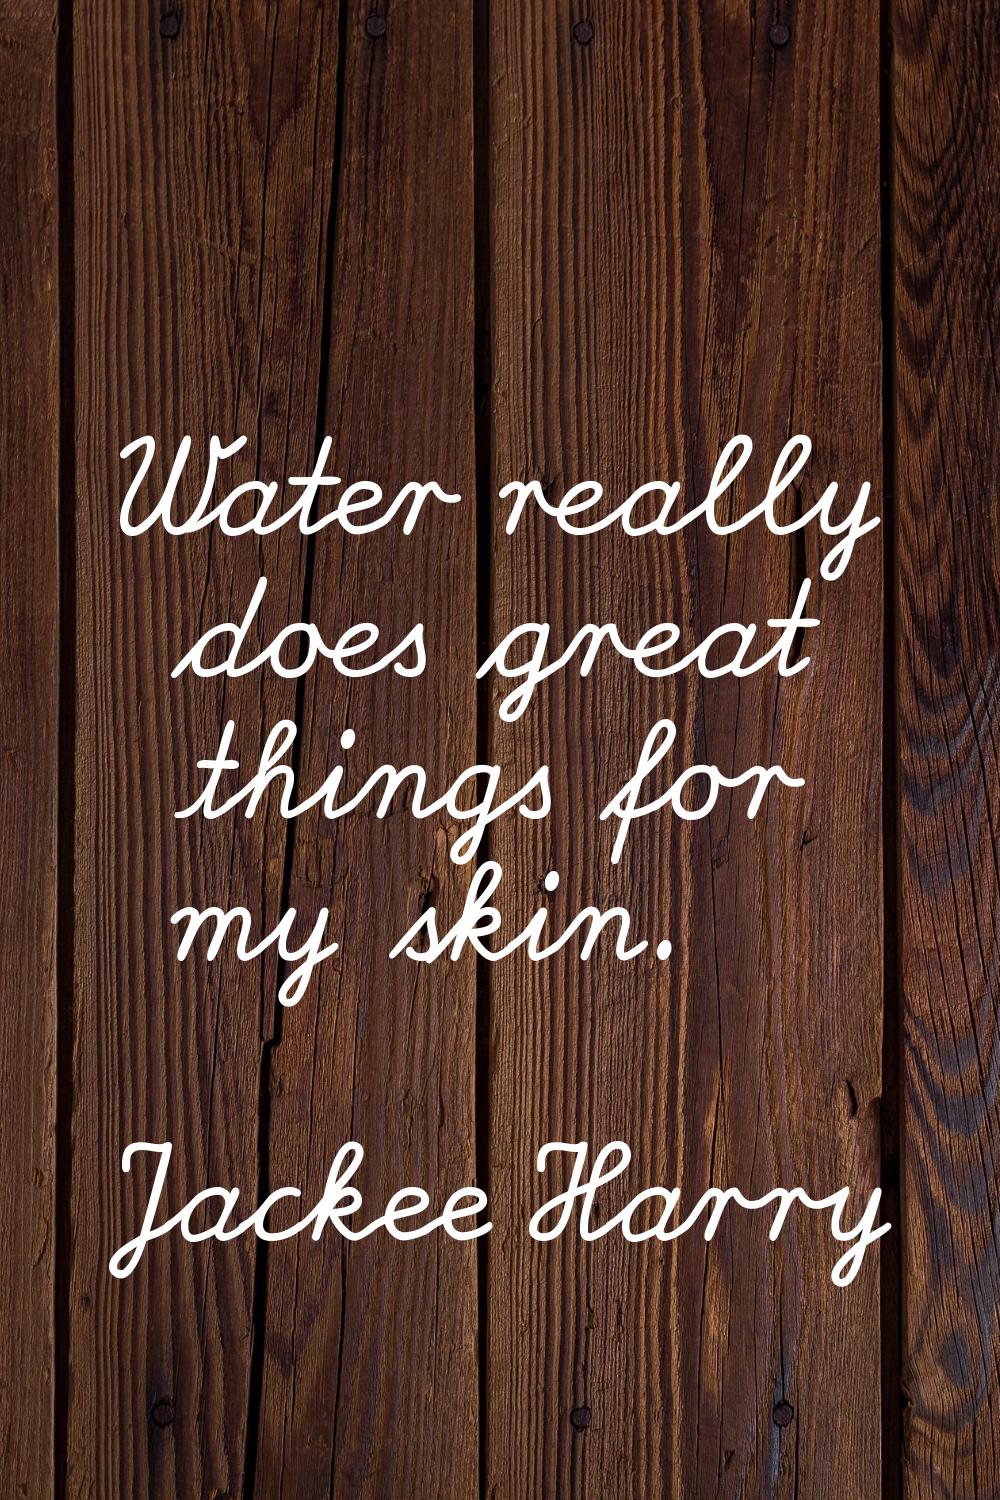 Water really does great things for my skin.